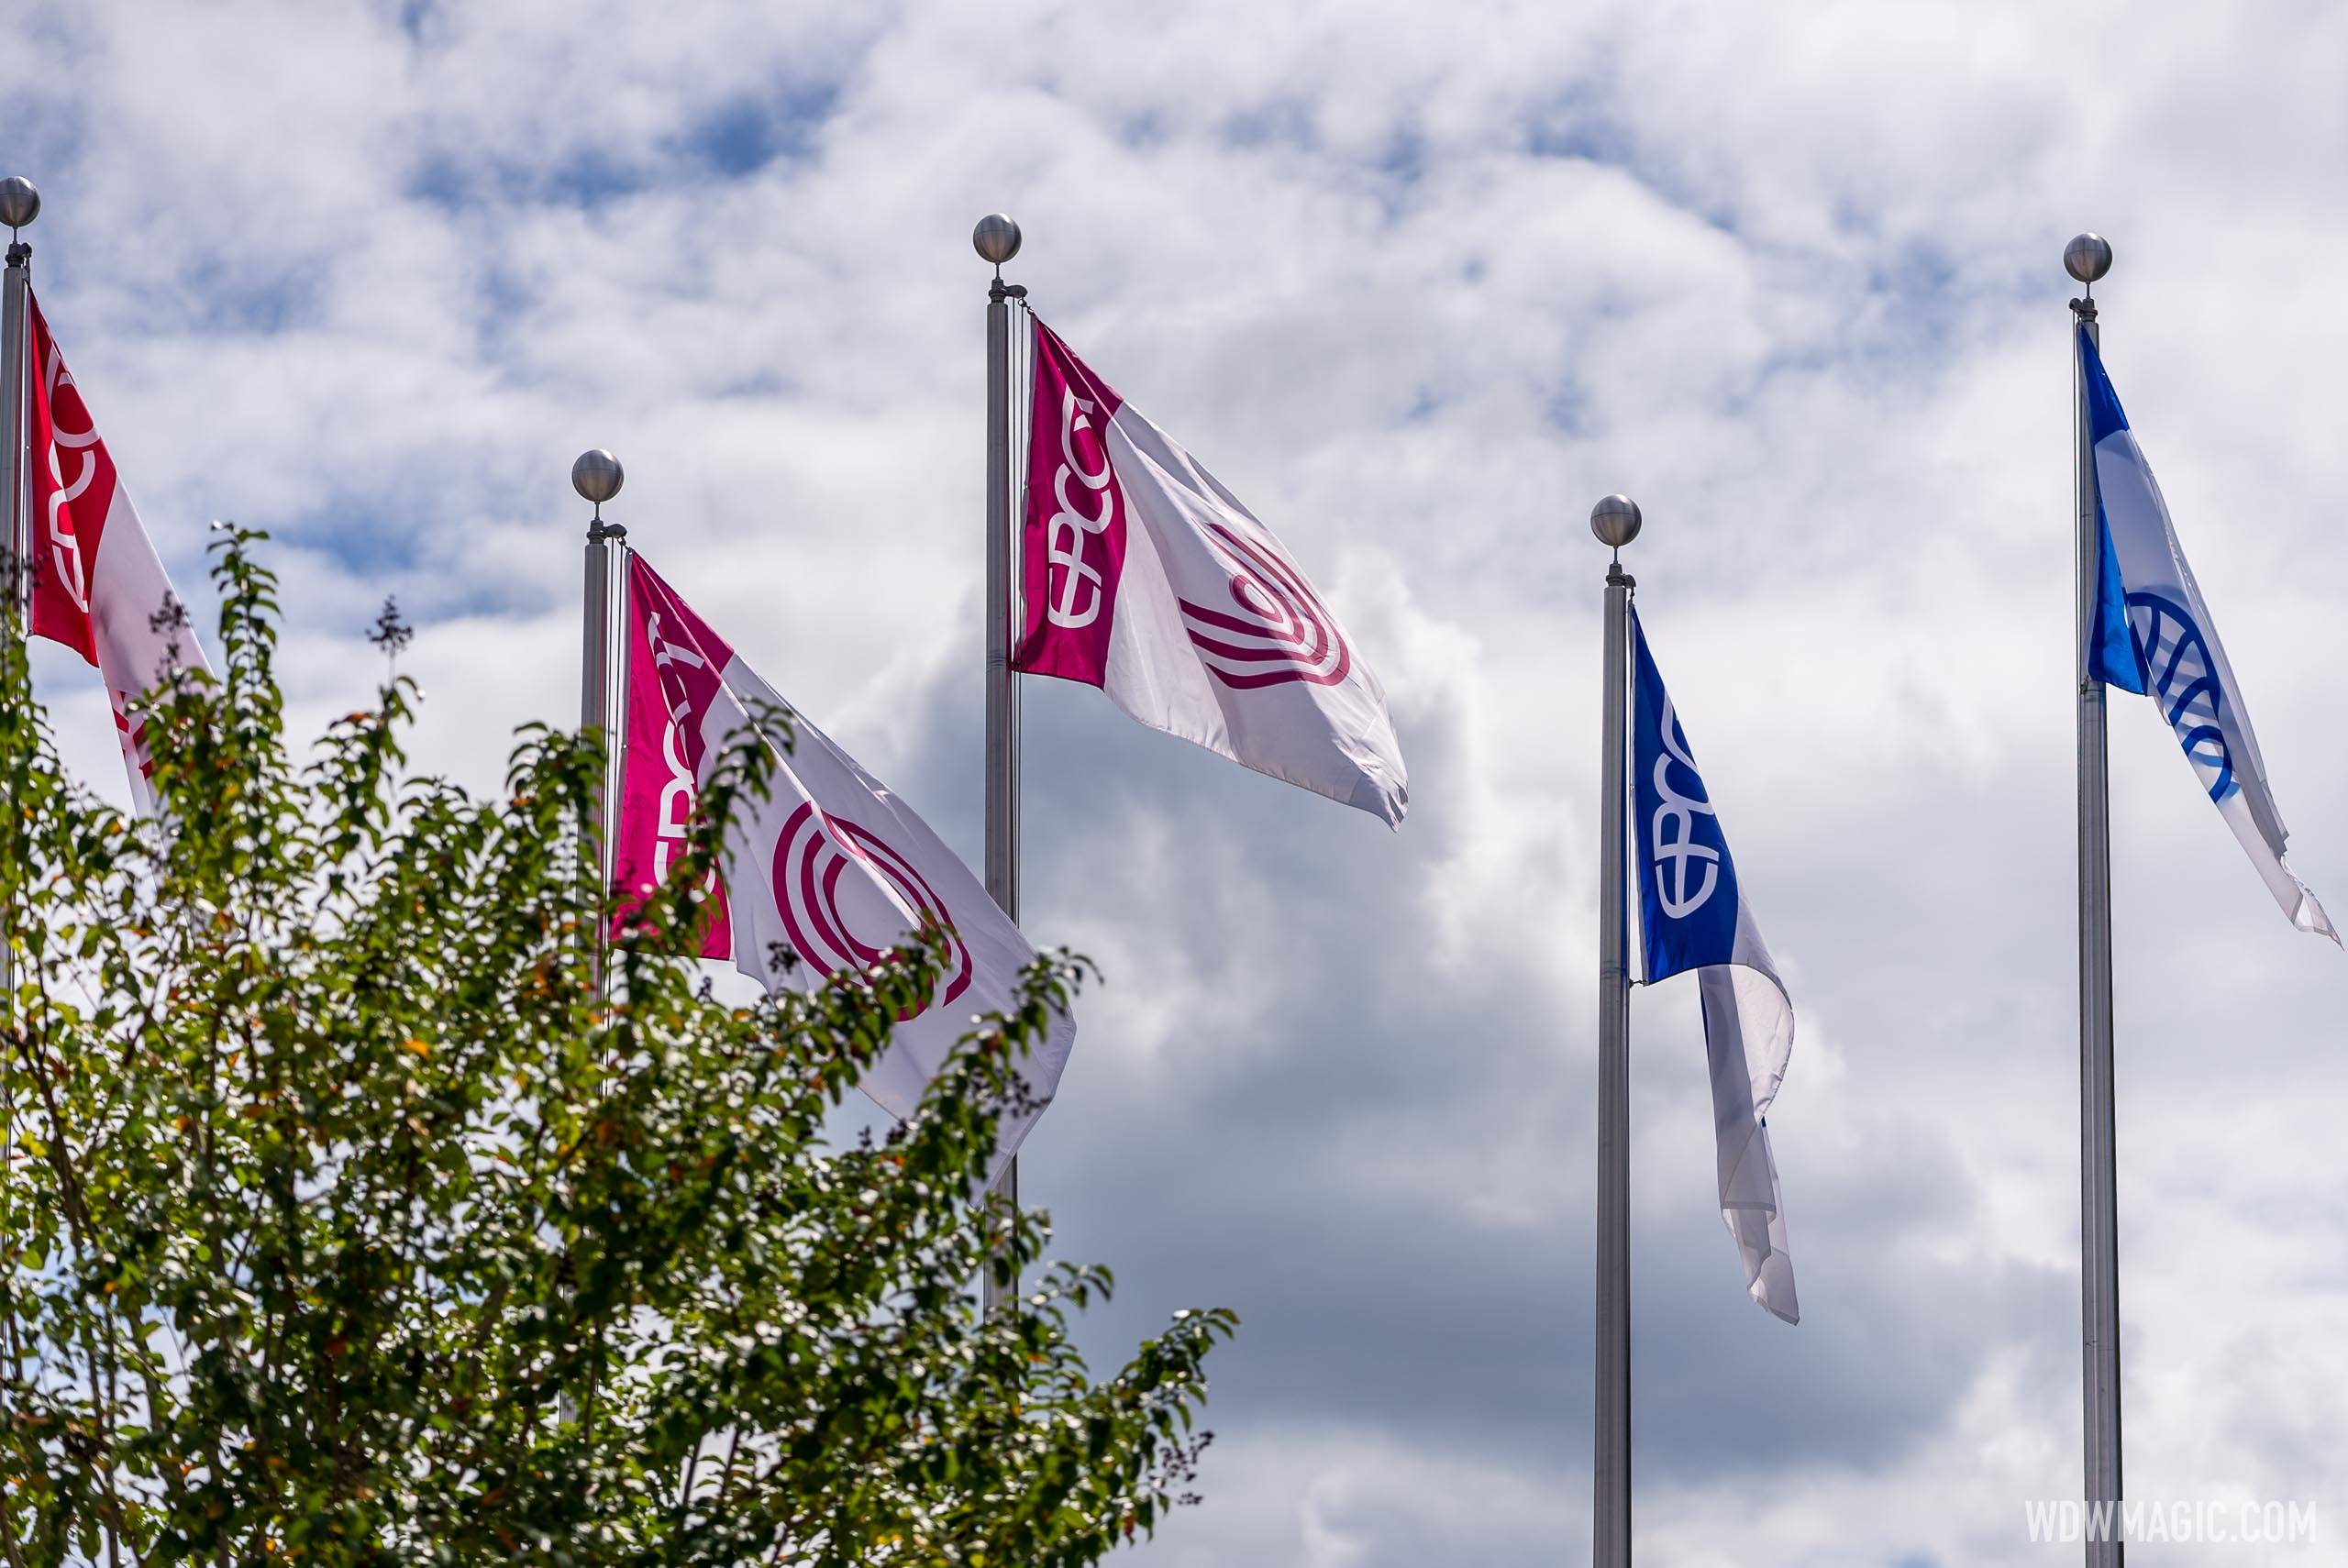 Updated EPCOT main entrance flags - September 2021